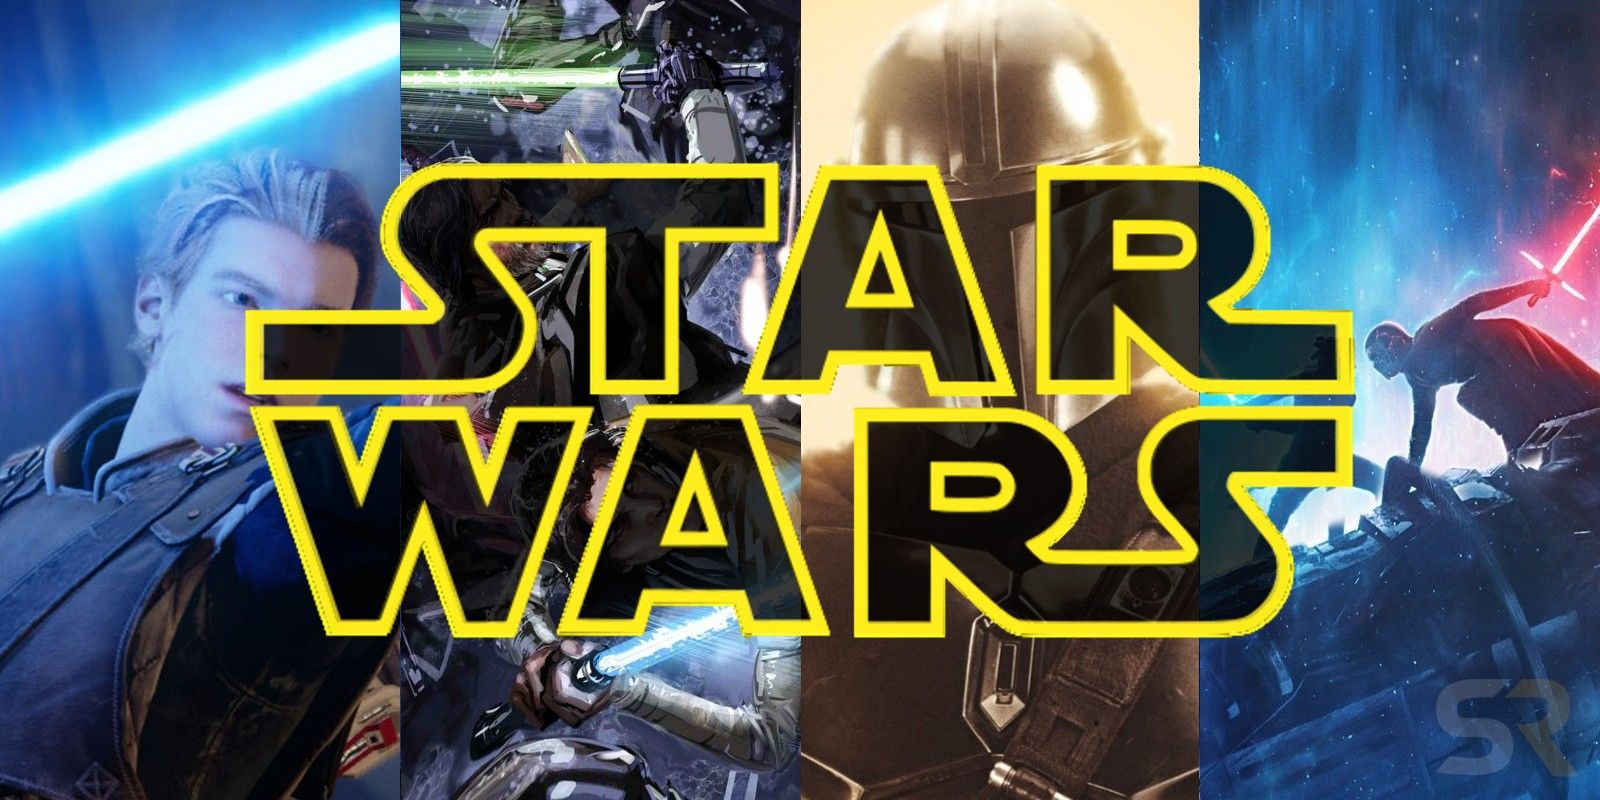 Star Wars Every Upcoming Movie TV Show Game Book Comic & More (20212027)